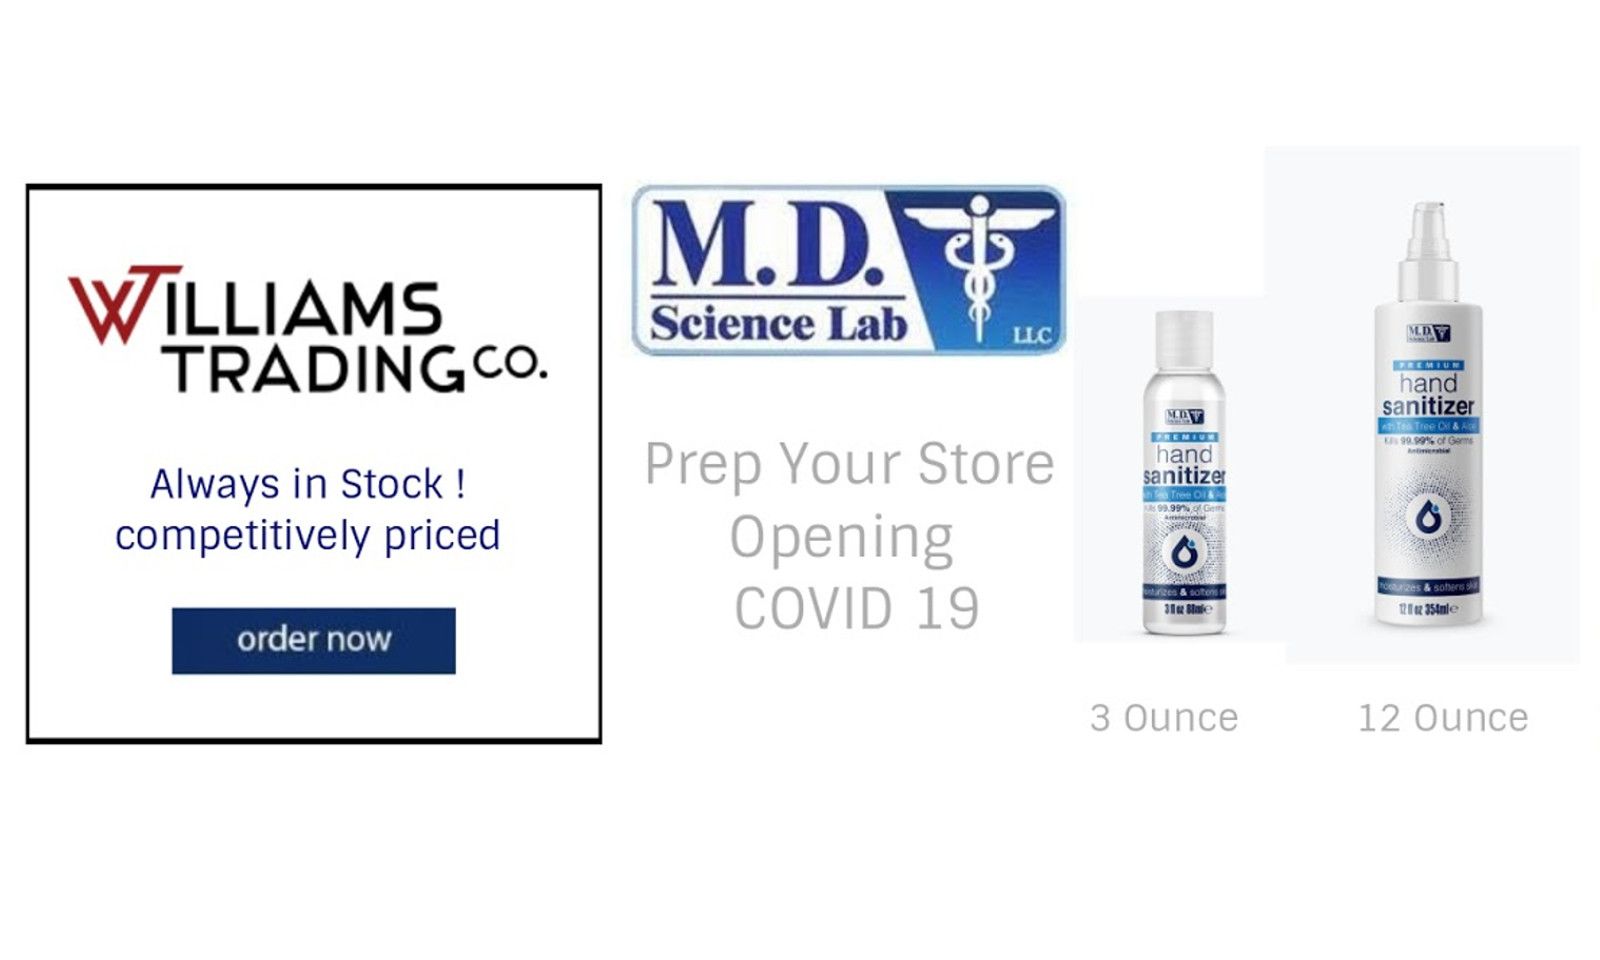 Williams Trading Co. Now Distributing M.D. Science Hand Sanitizer